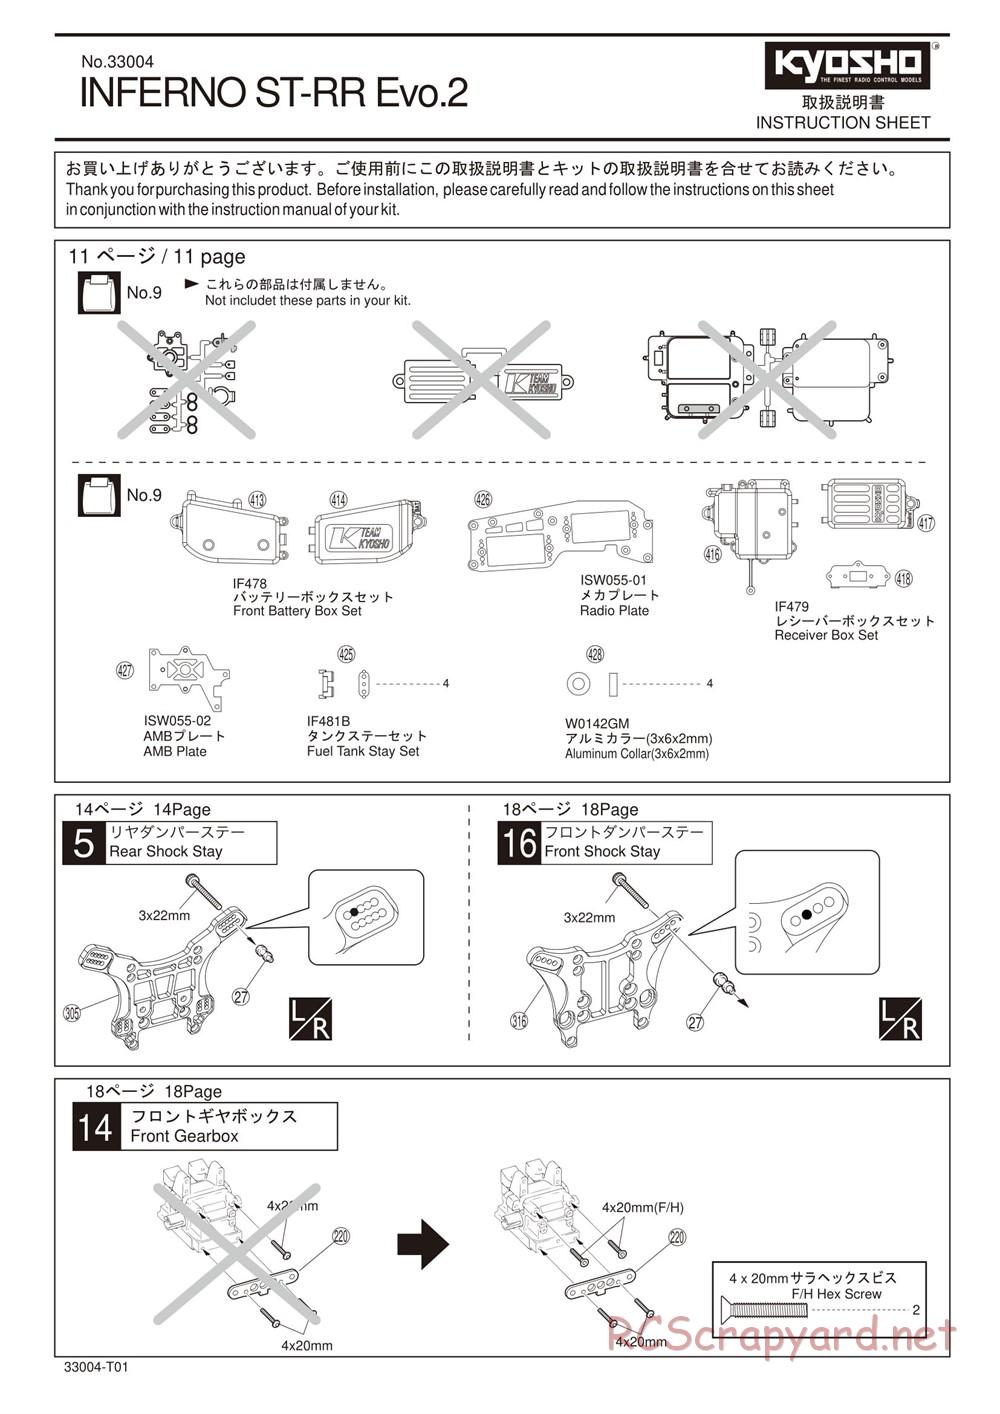 Kyosho - Inferno ST-RR Evo.2 - Manual - Page 1